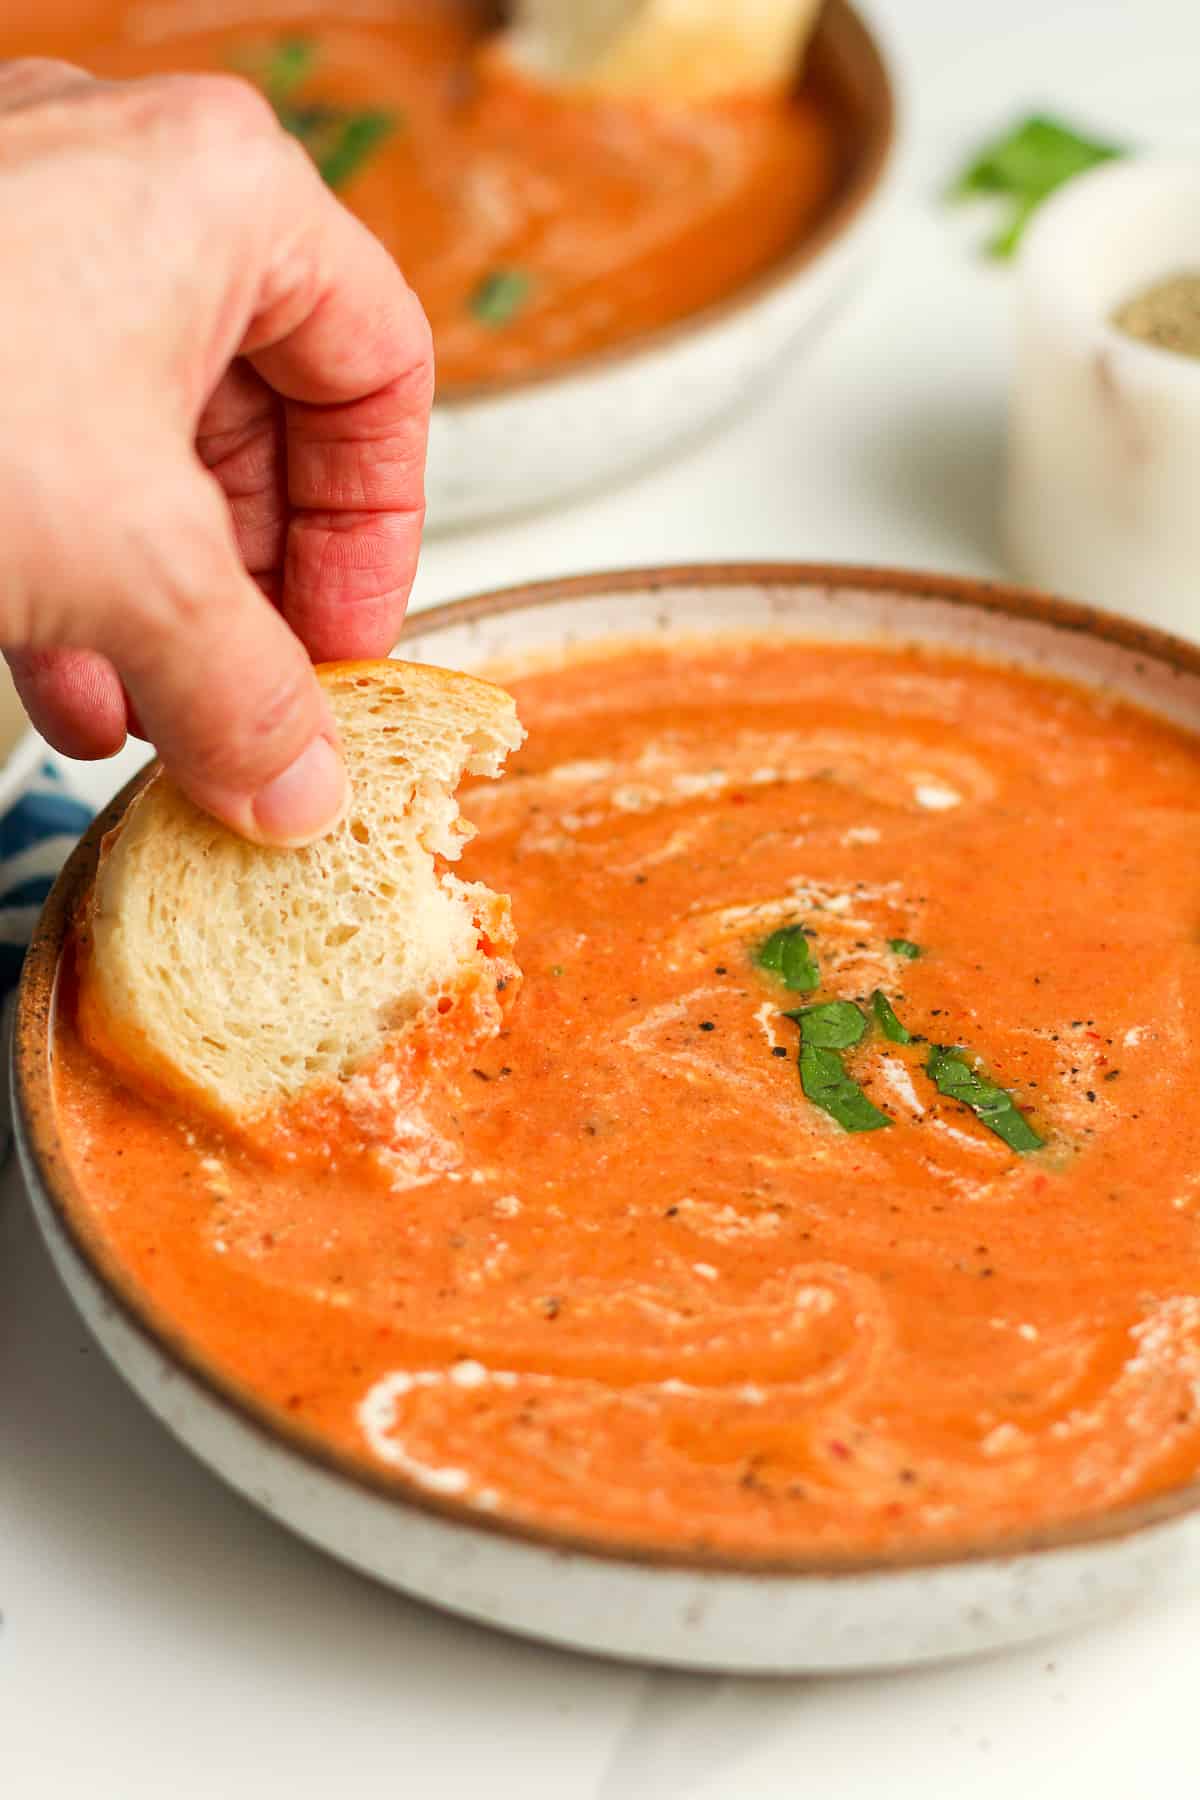 My hand dipping some bread into a bowl of creamy tomato bisque.